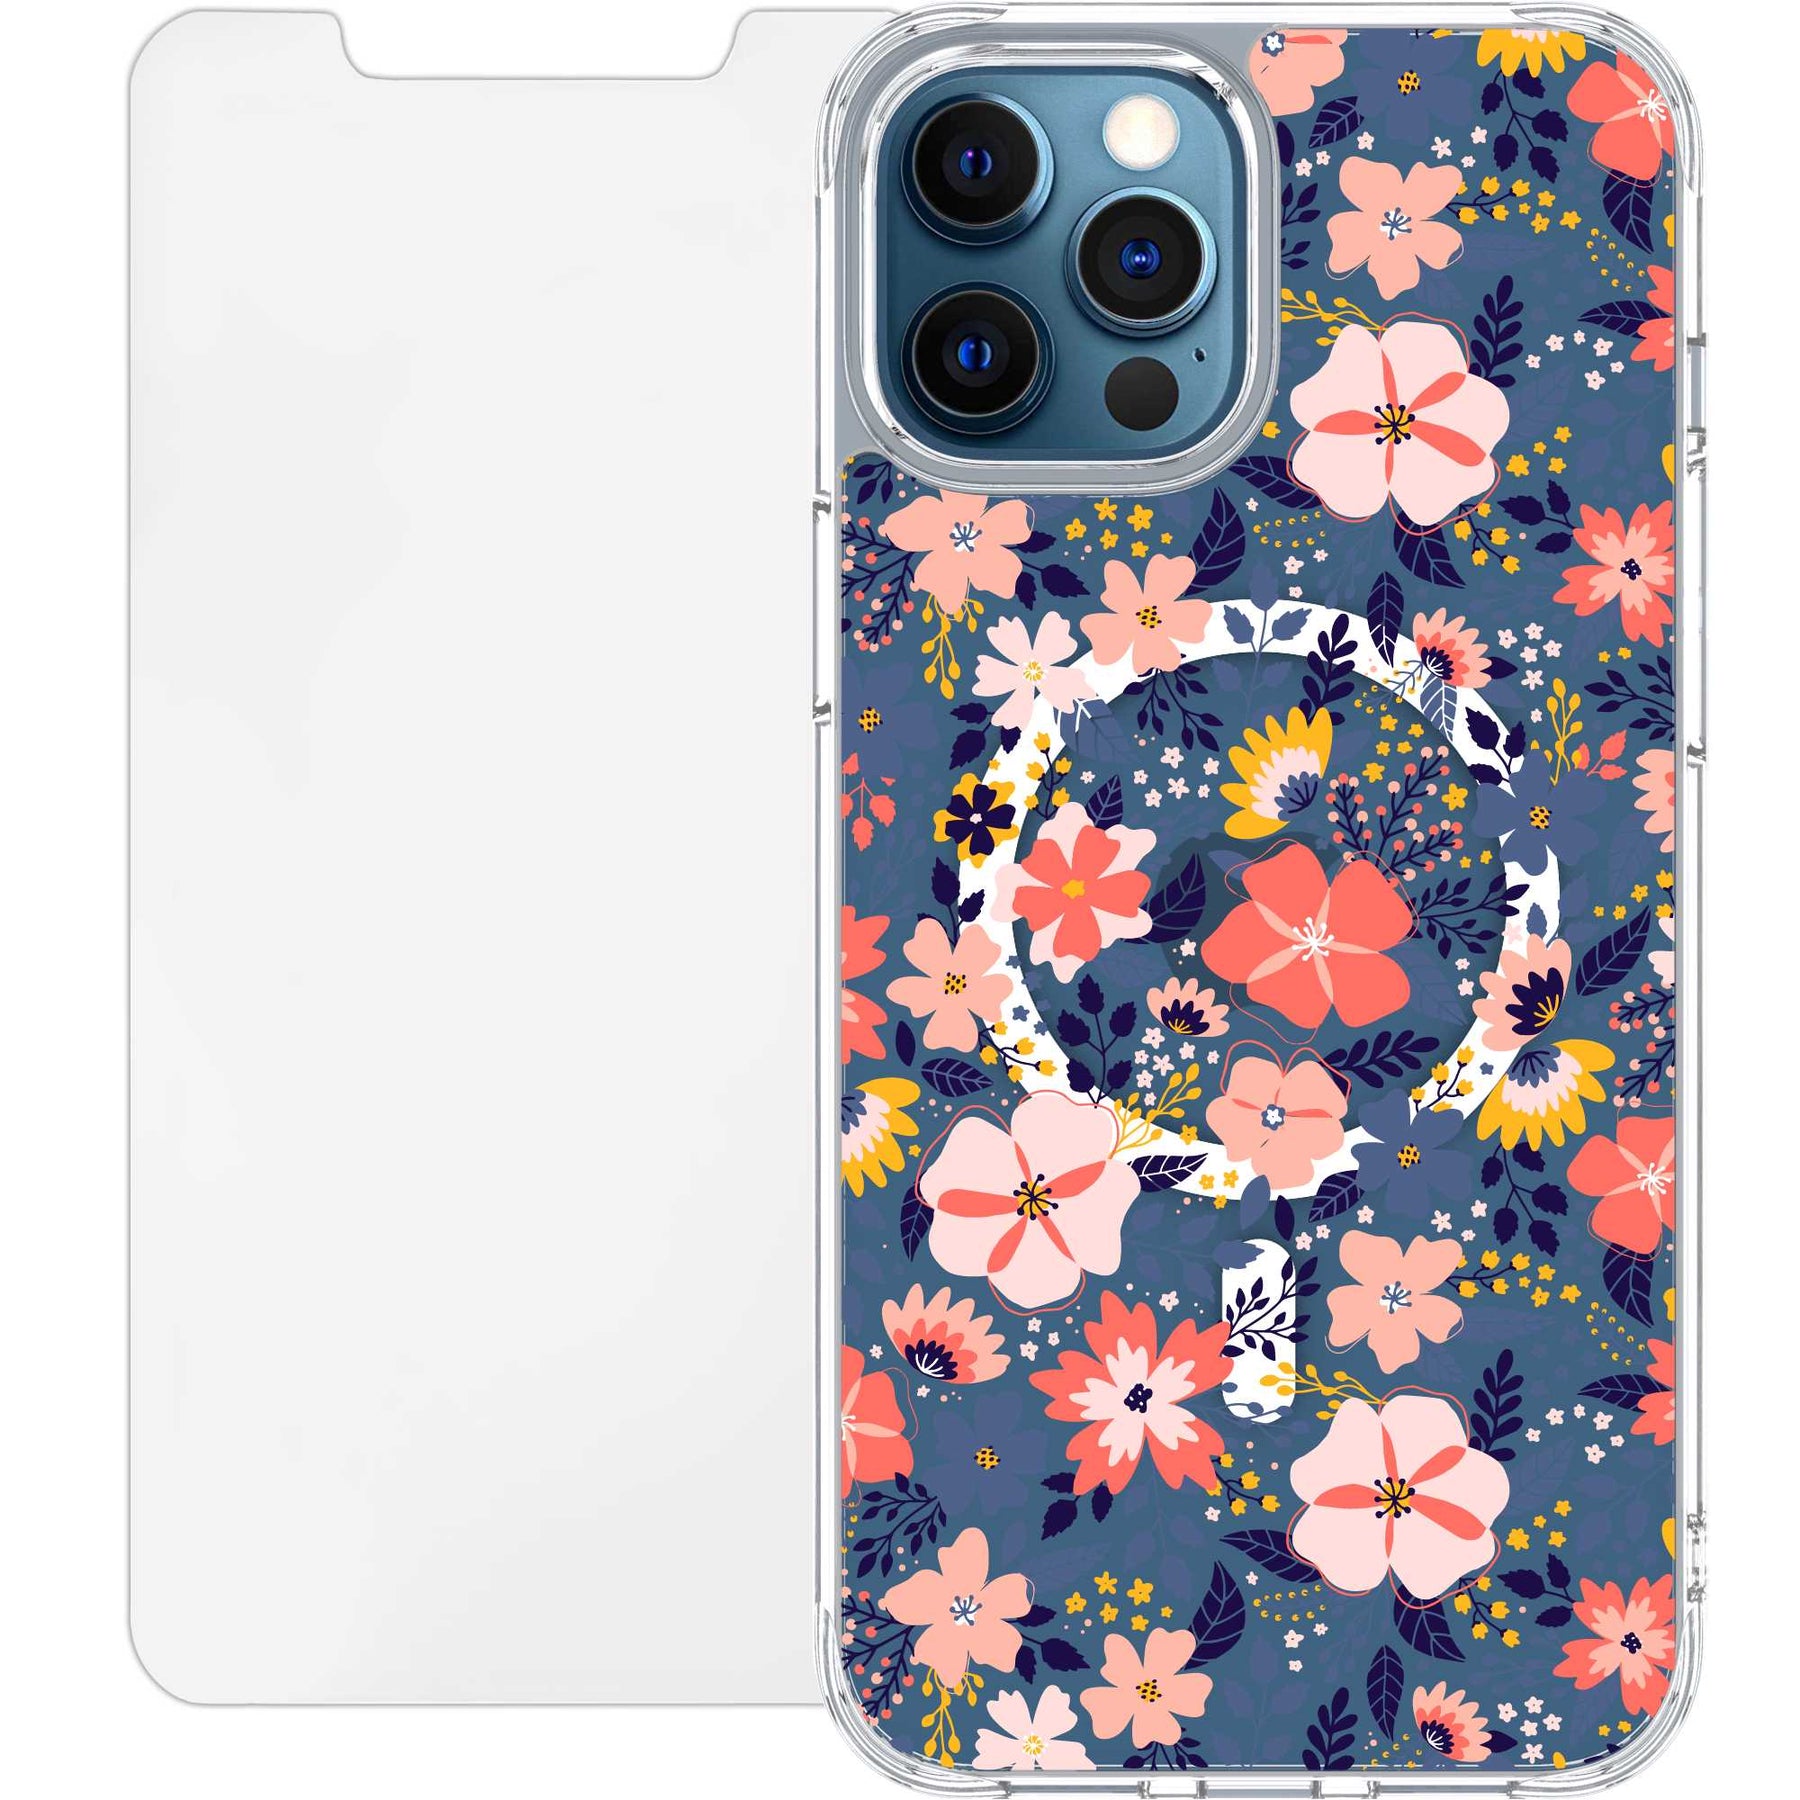 Scooch MagCase for iPhone 12 Pro Max Wildflowers Scooch MagCase